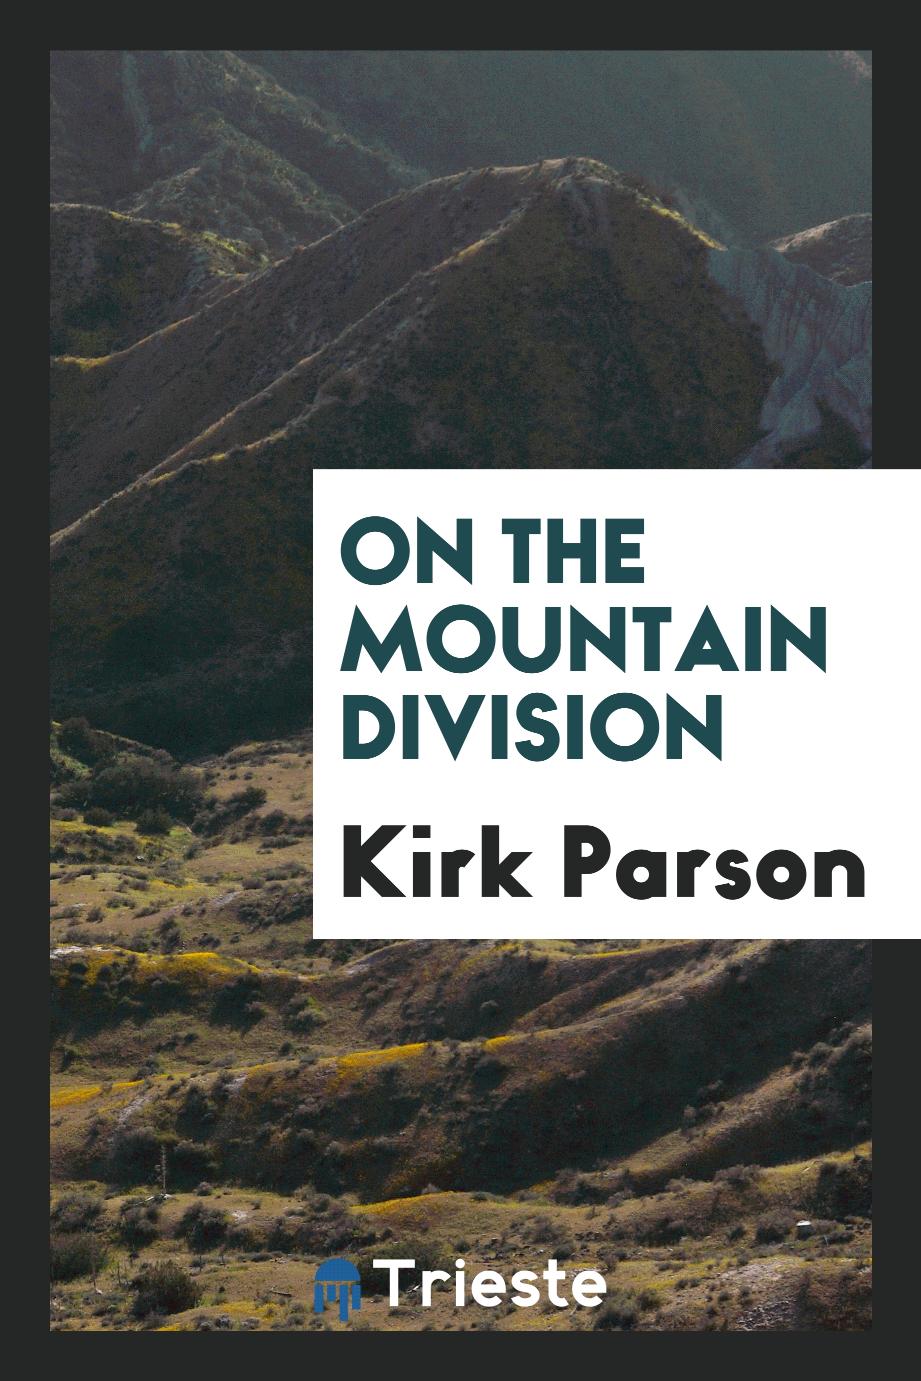 On the Mountain Division